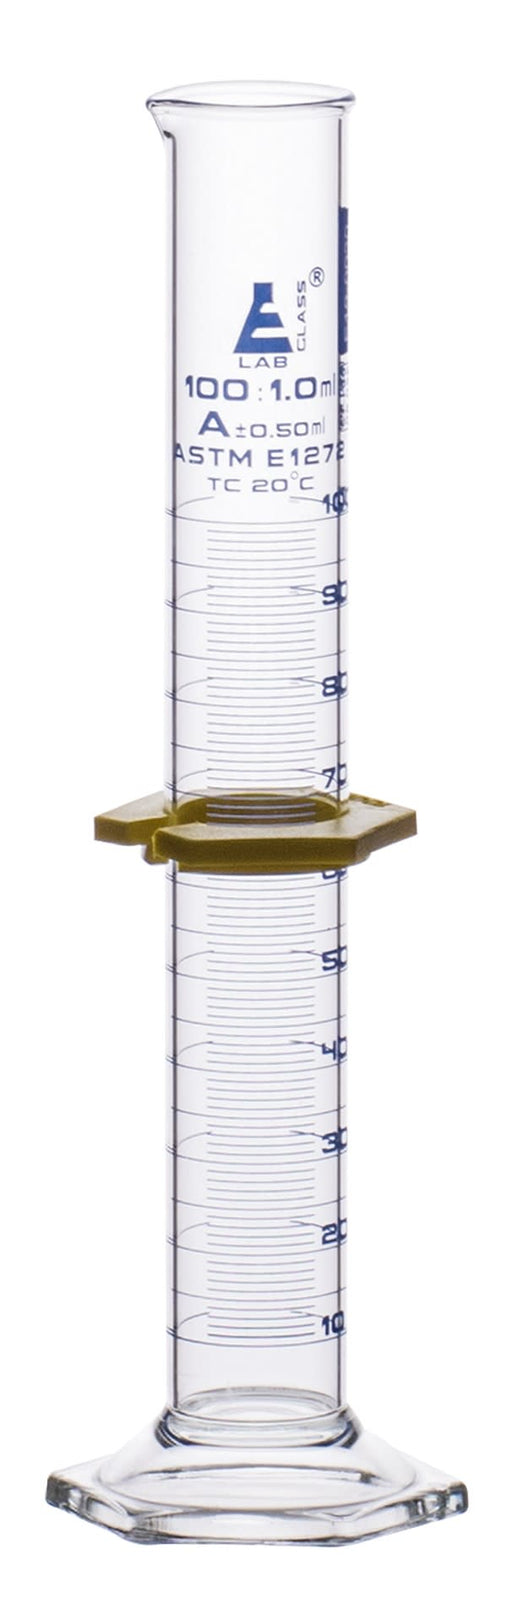 Measuring Cylinder, 100ml - ASTM, Class A - Tolerance ±0.50ml - Protective Collar, Hexagonal Base - Blue Graduations - With Individual Work Certificate - Borosilicate 3.3 Glass - Eisco Labs